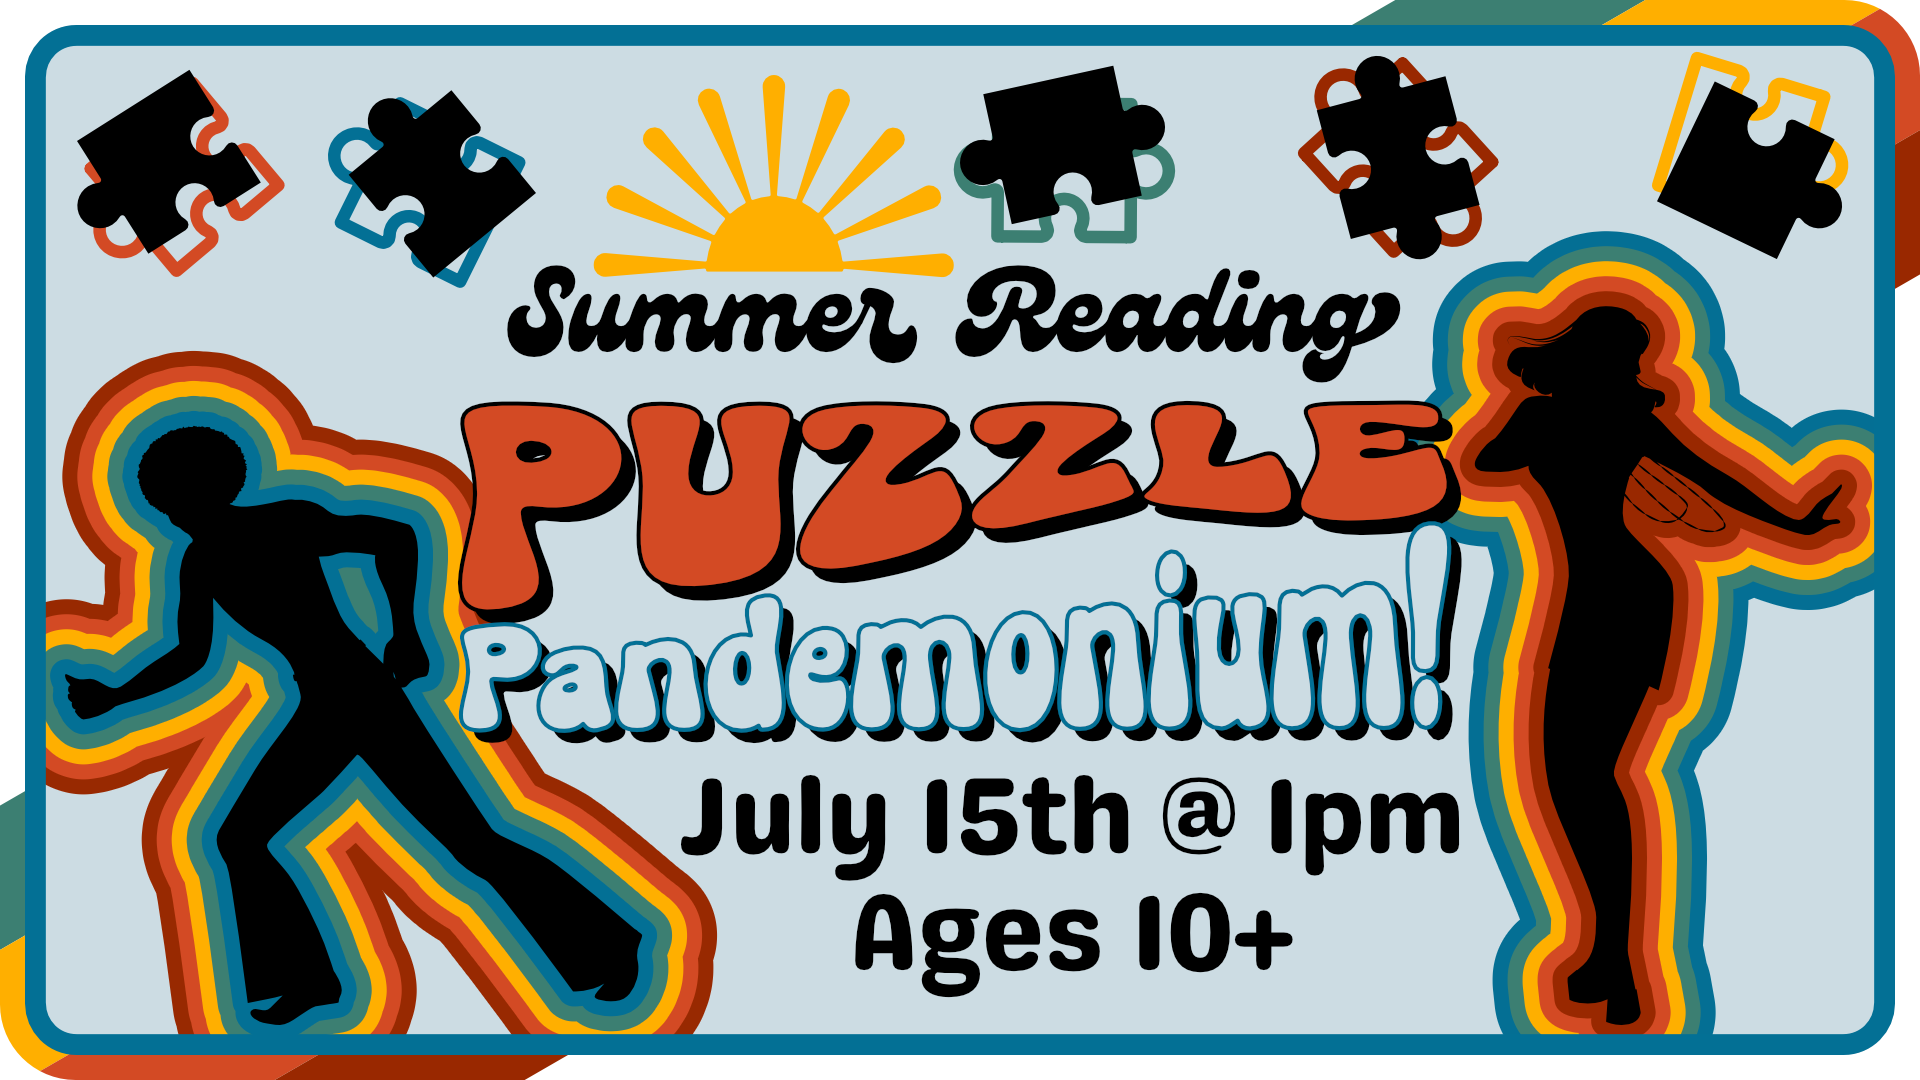 Summer Reading Puzzle Pandemonium for teams of age 10+, July 15th at 1pm